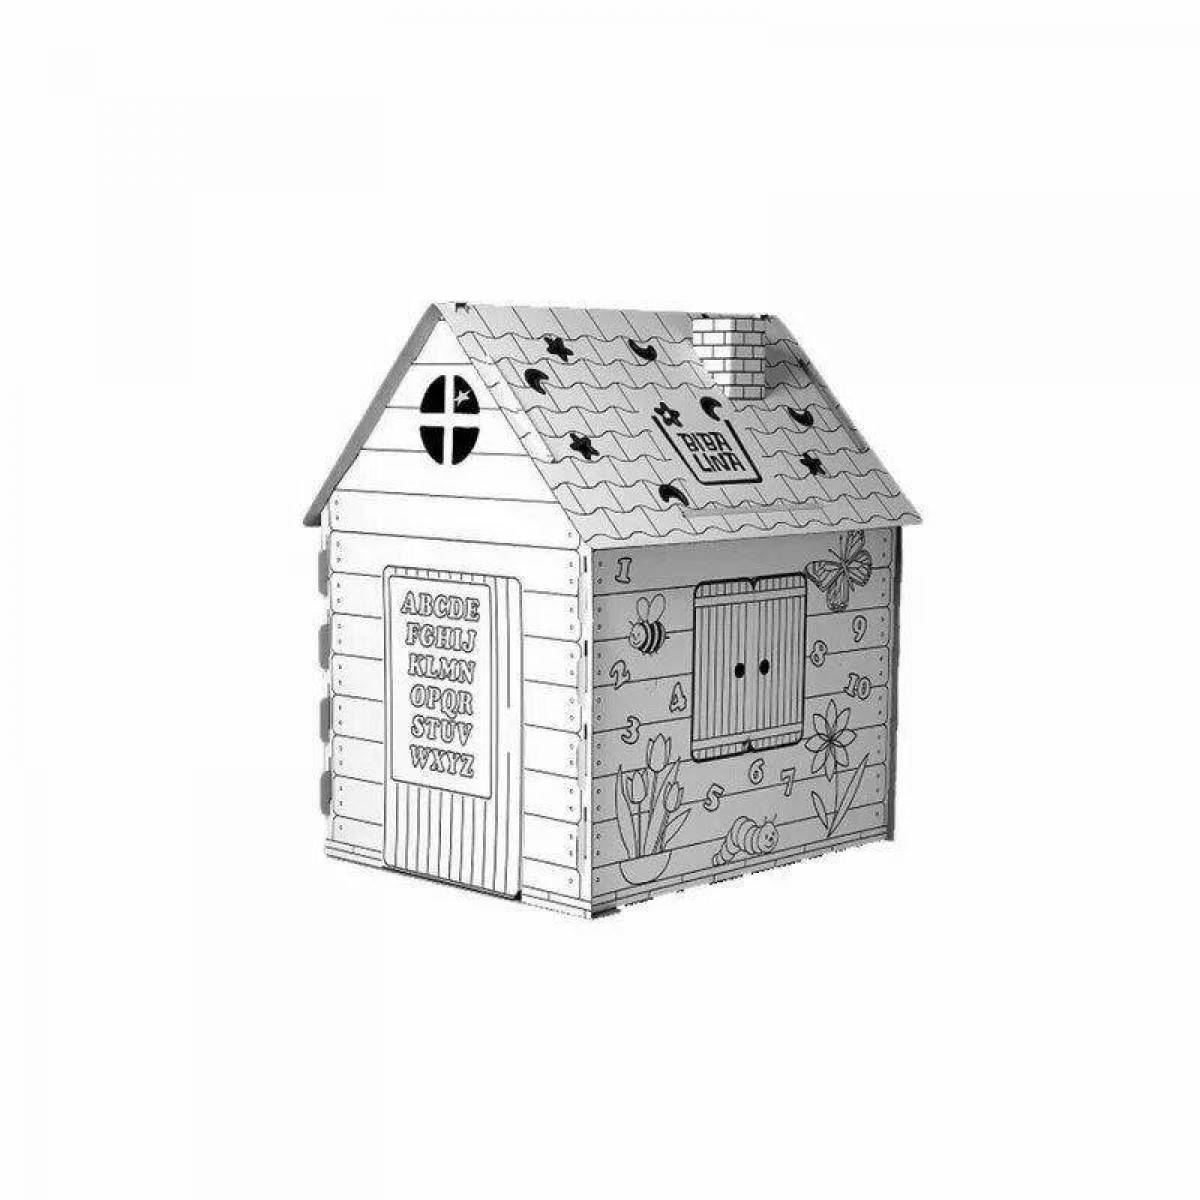 Coloring book bright ozone cardboard house